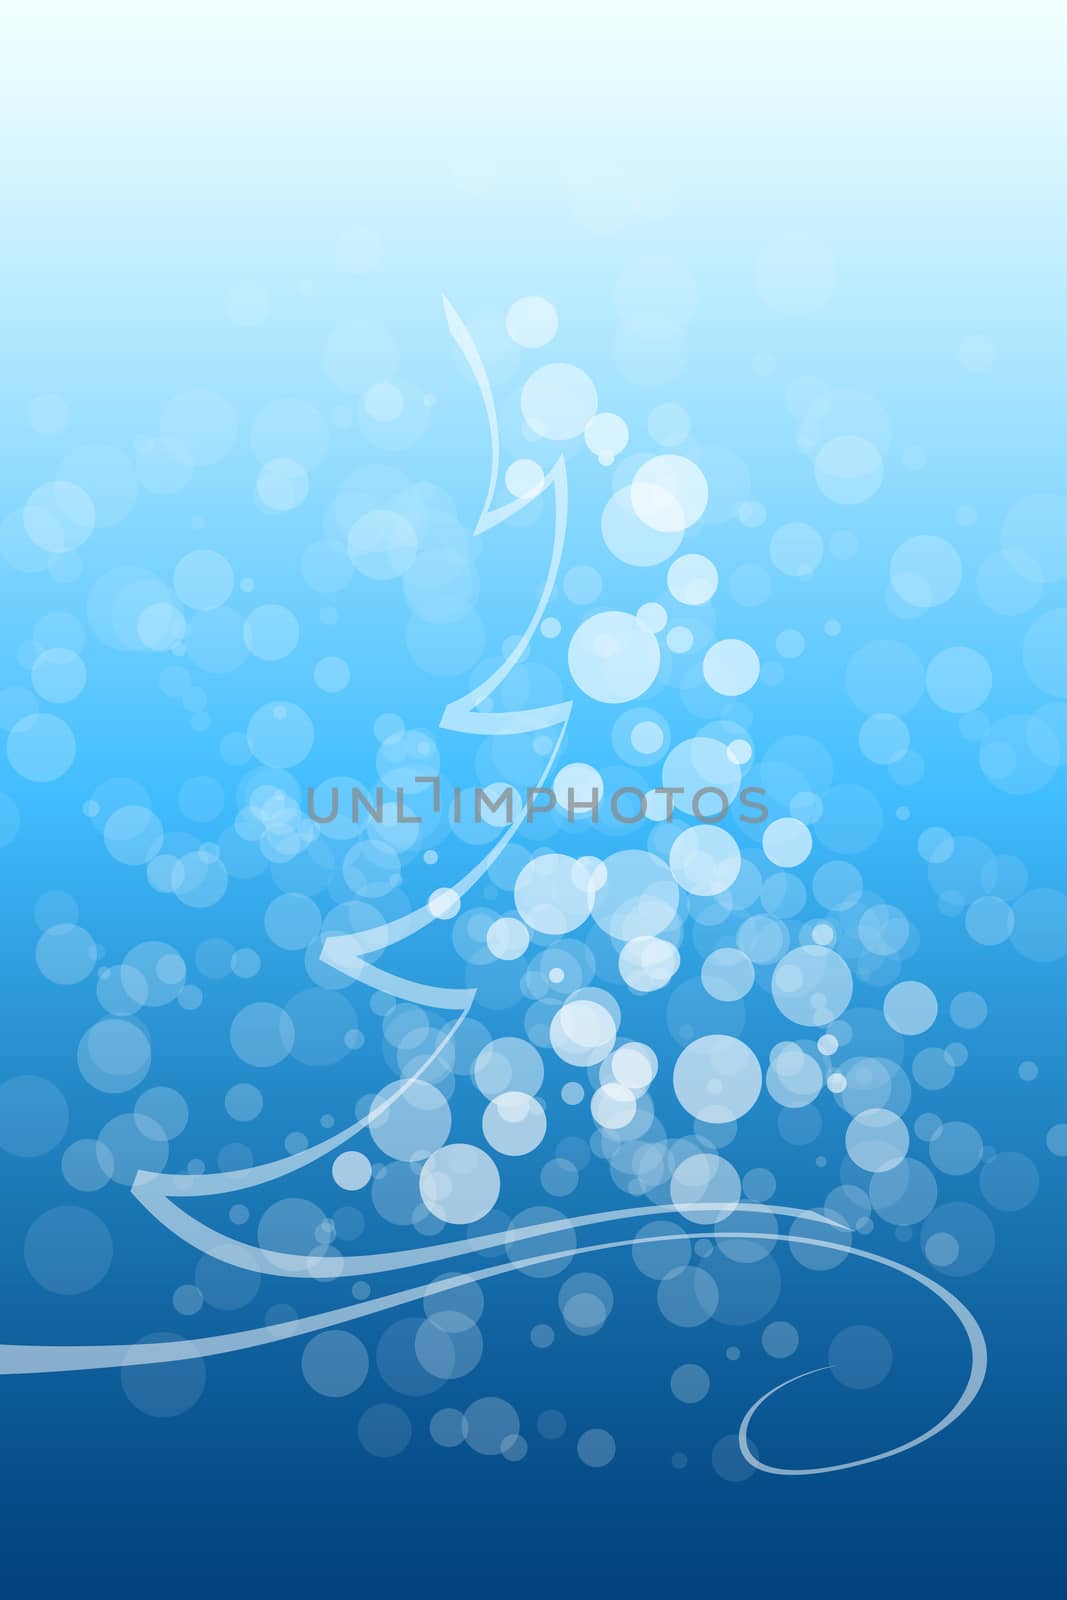 Abstract Winter and Christmas background in blue color